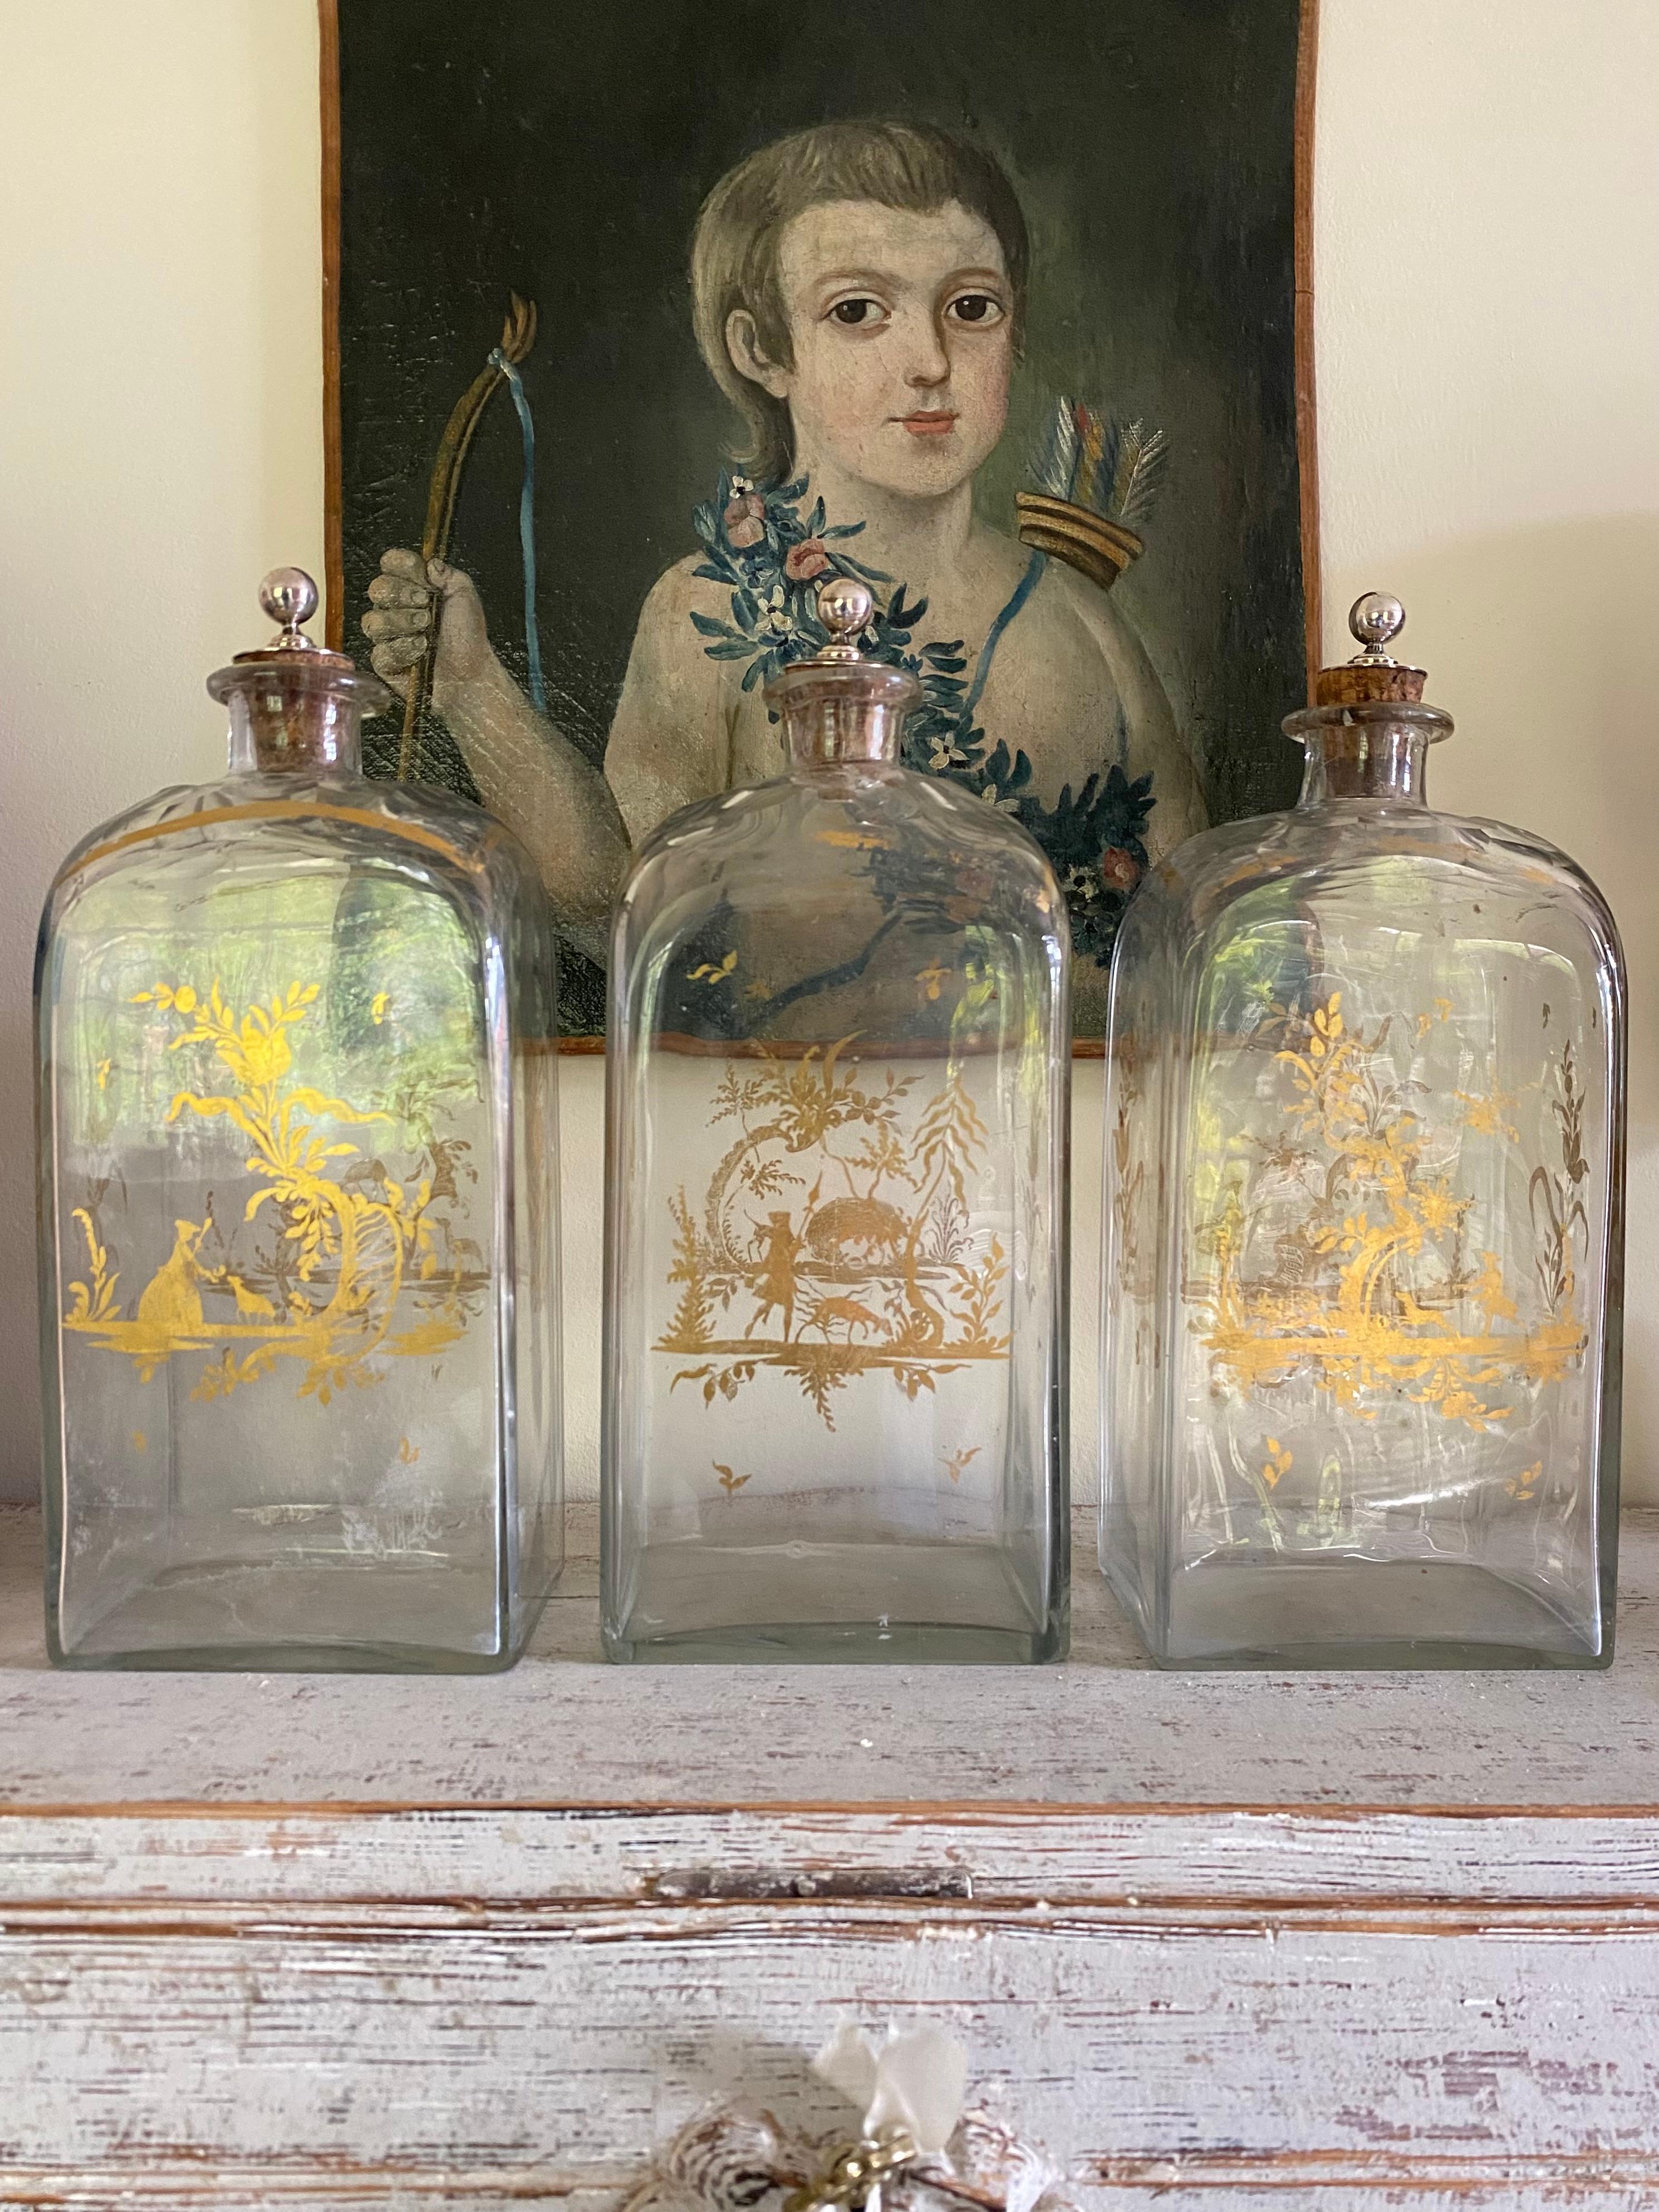 A set of three large 19th century bohemian glass decanters with delightful gilded decoration each decanter has different scenes making six in all and the sides are hand too - the tops are cut bevelled glass and the cork stoppers are silver I believe